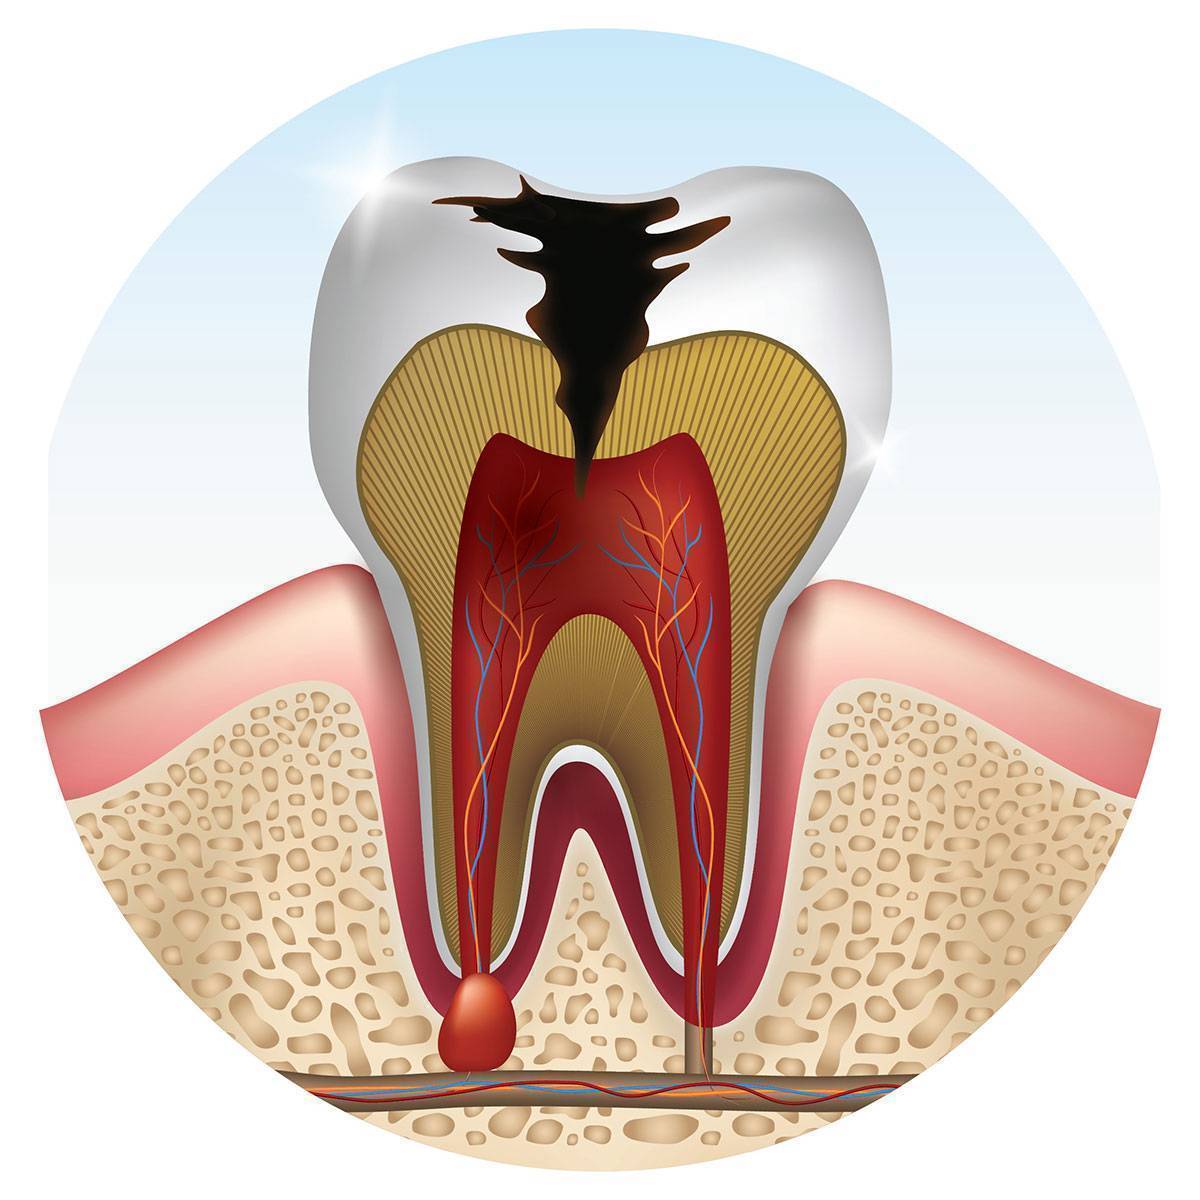 The Differences in Cavities, Decay & Caries